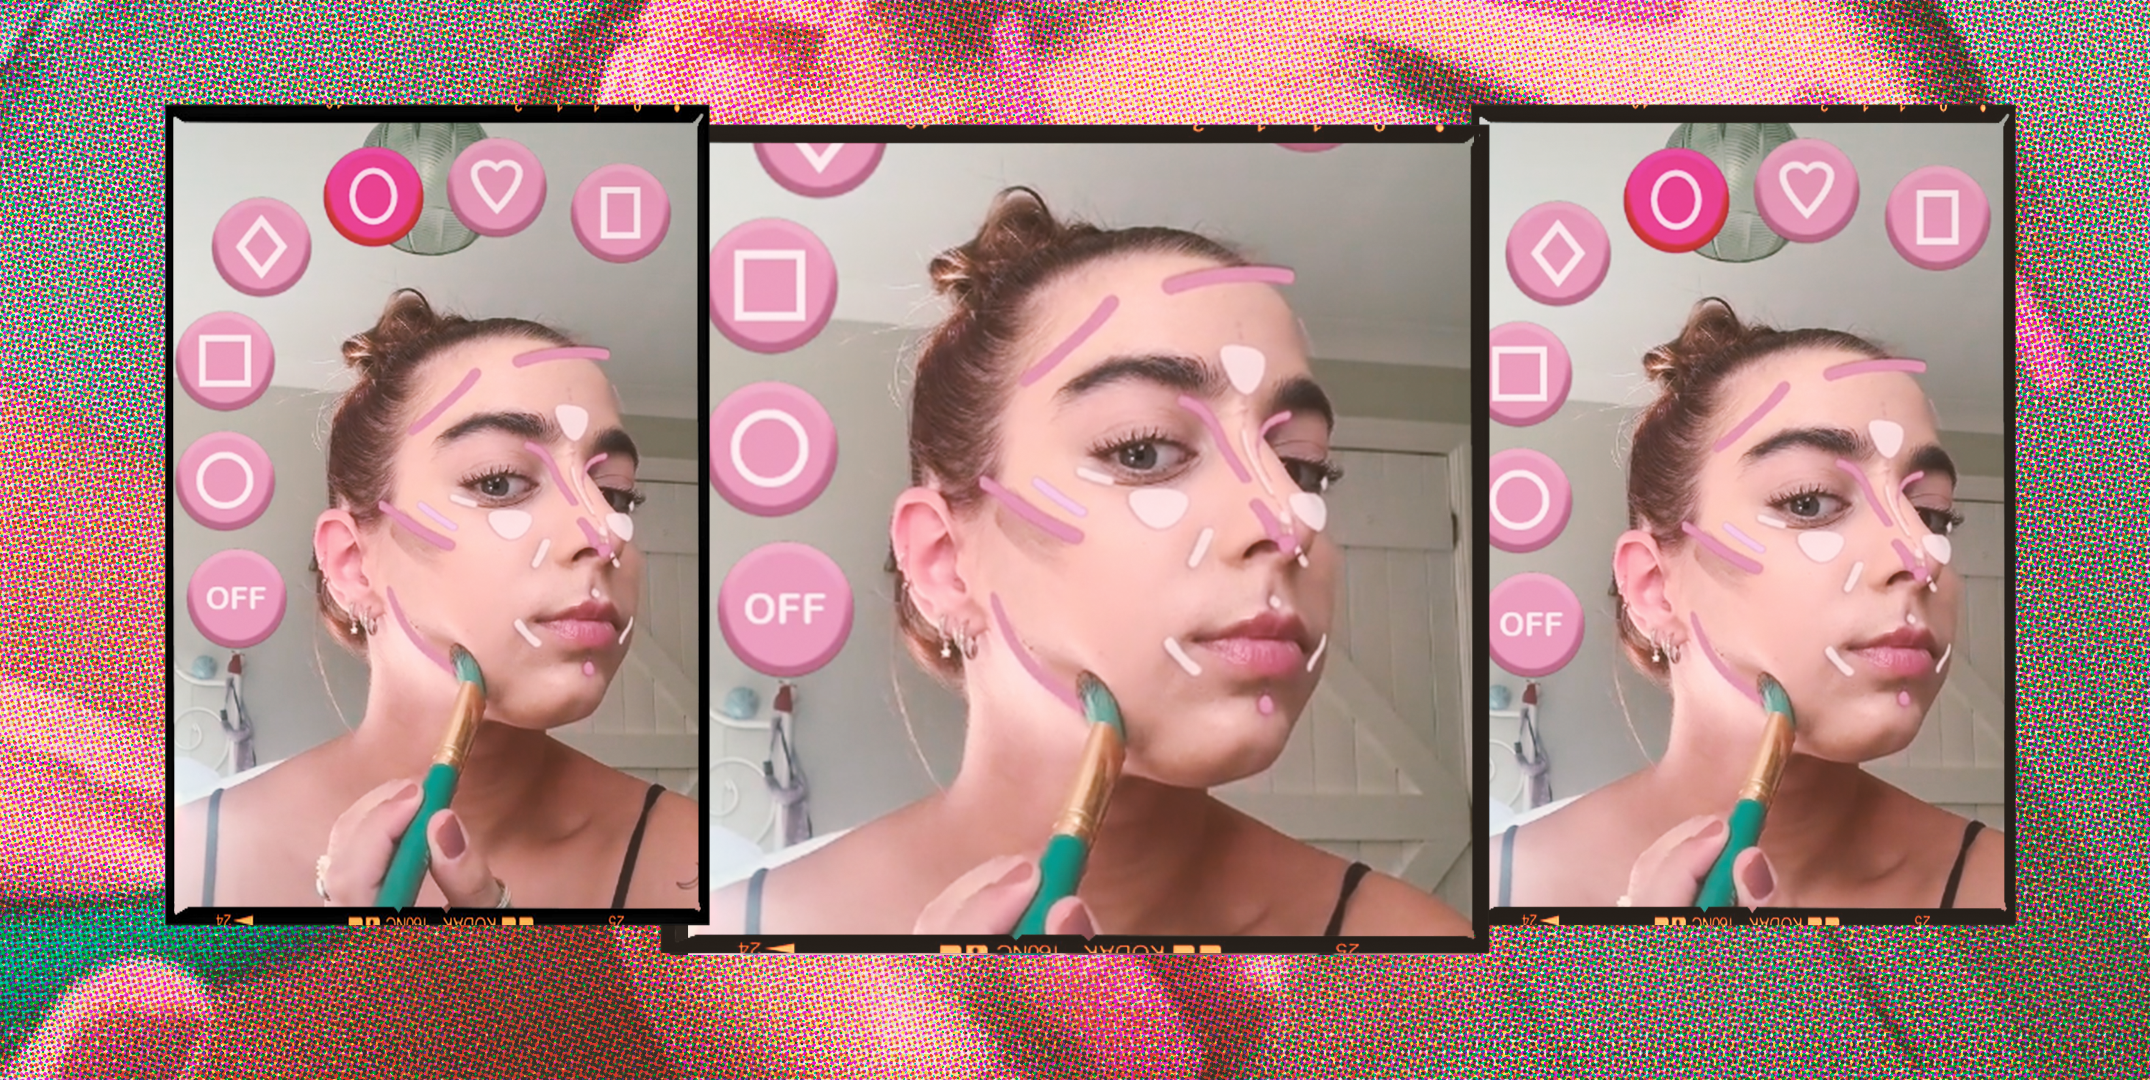 How to contour your face, according to viral TikTok filter